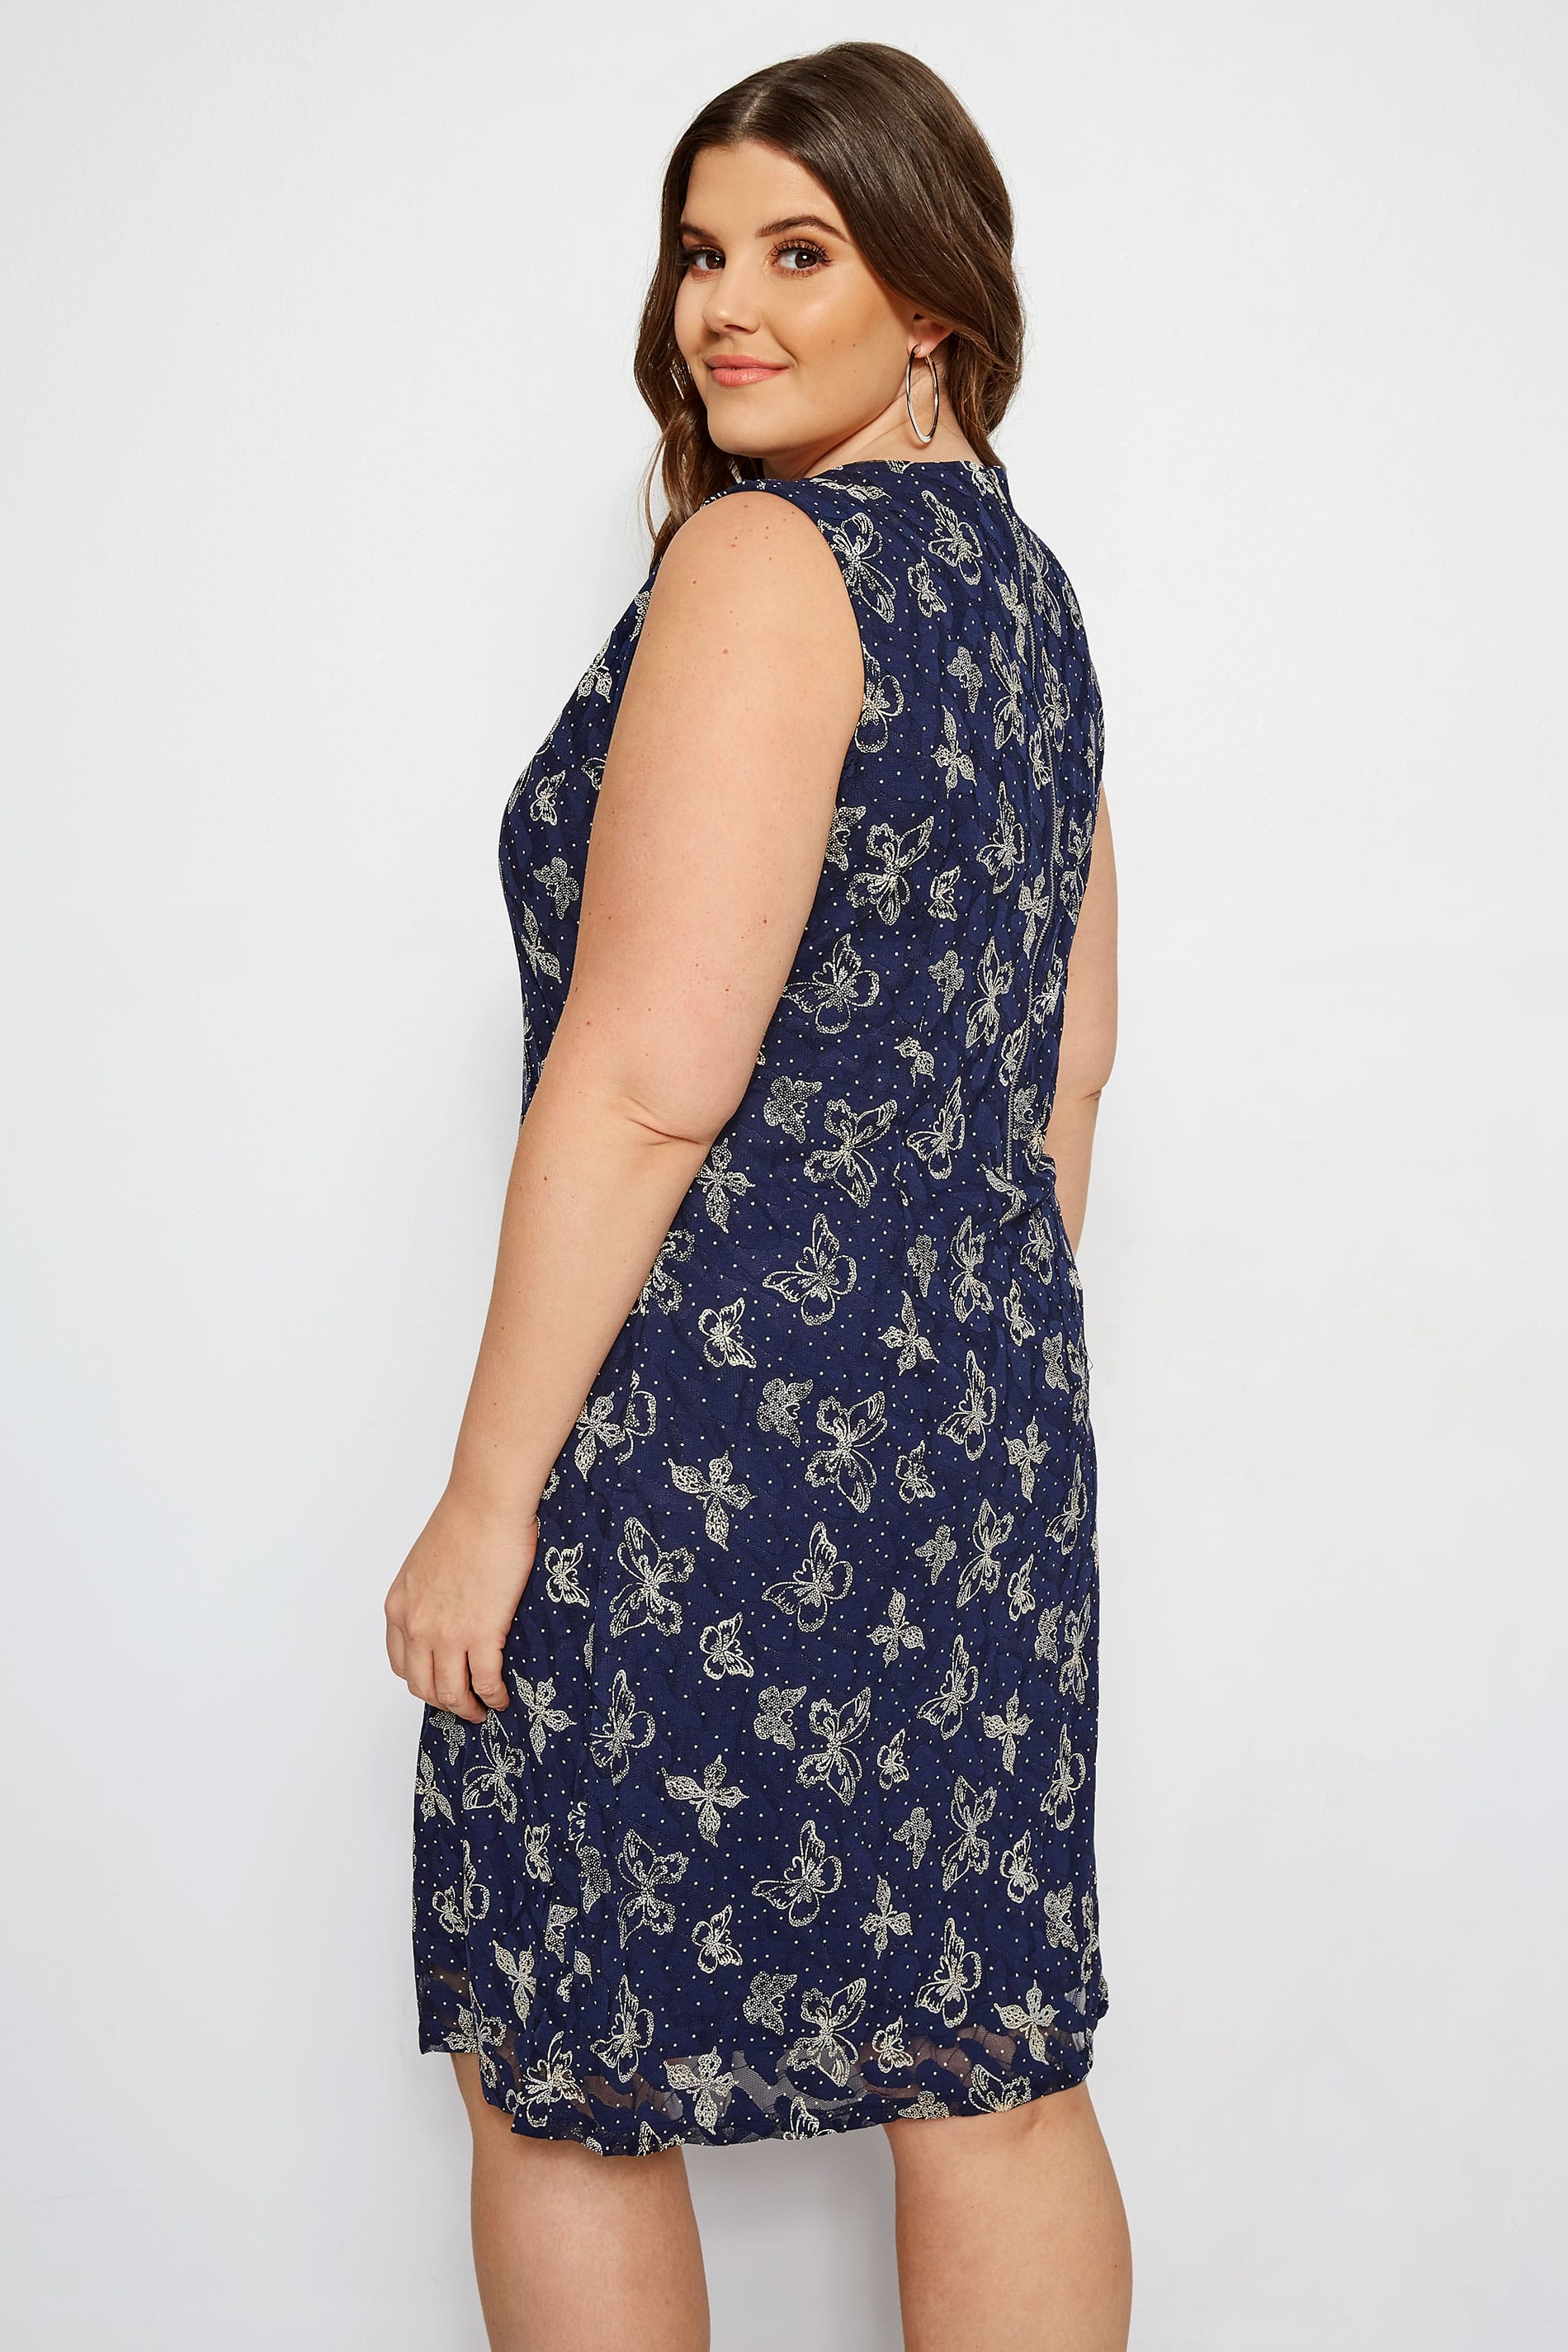 IZABEL CURVE Navy Lace Butterfly Dress | Plus Sizes 16 to 26 | Yours ...